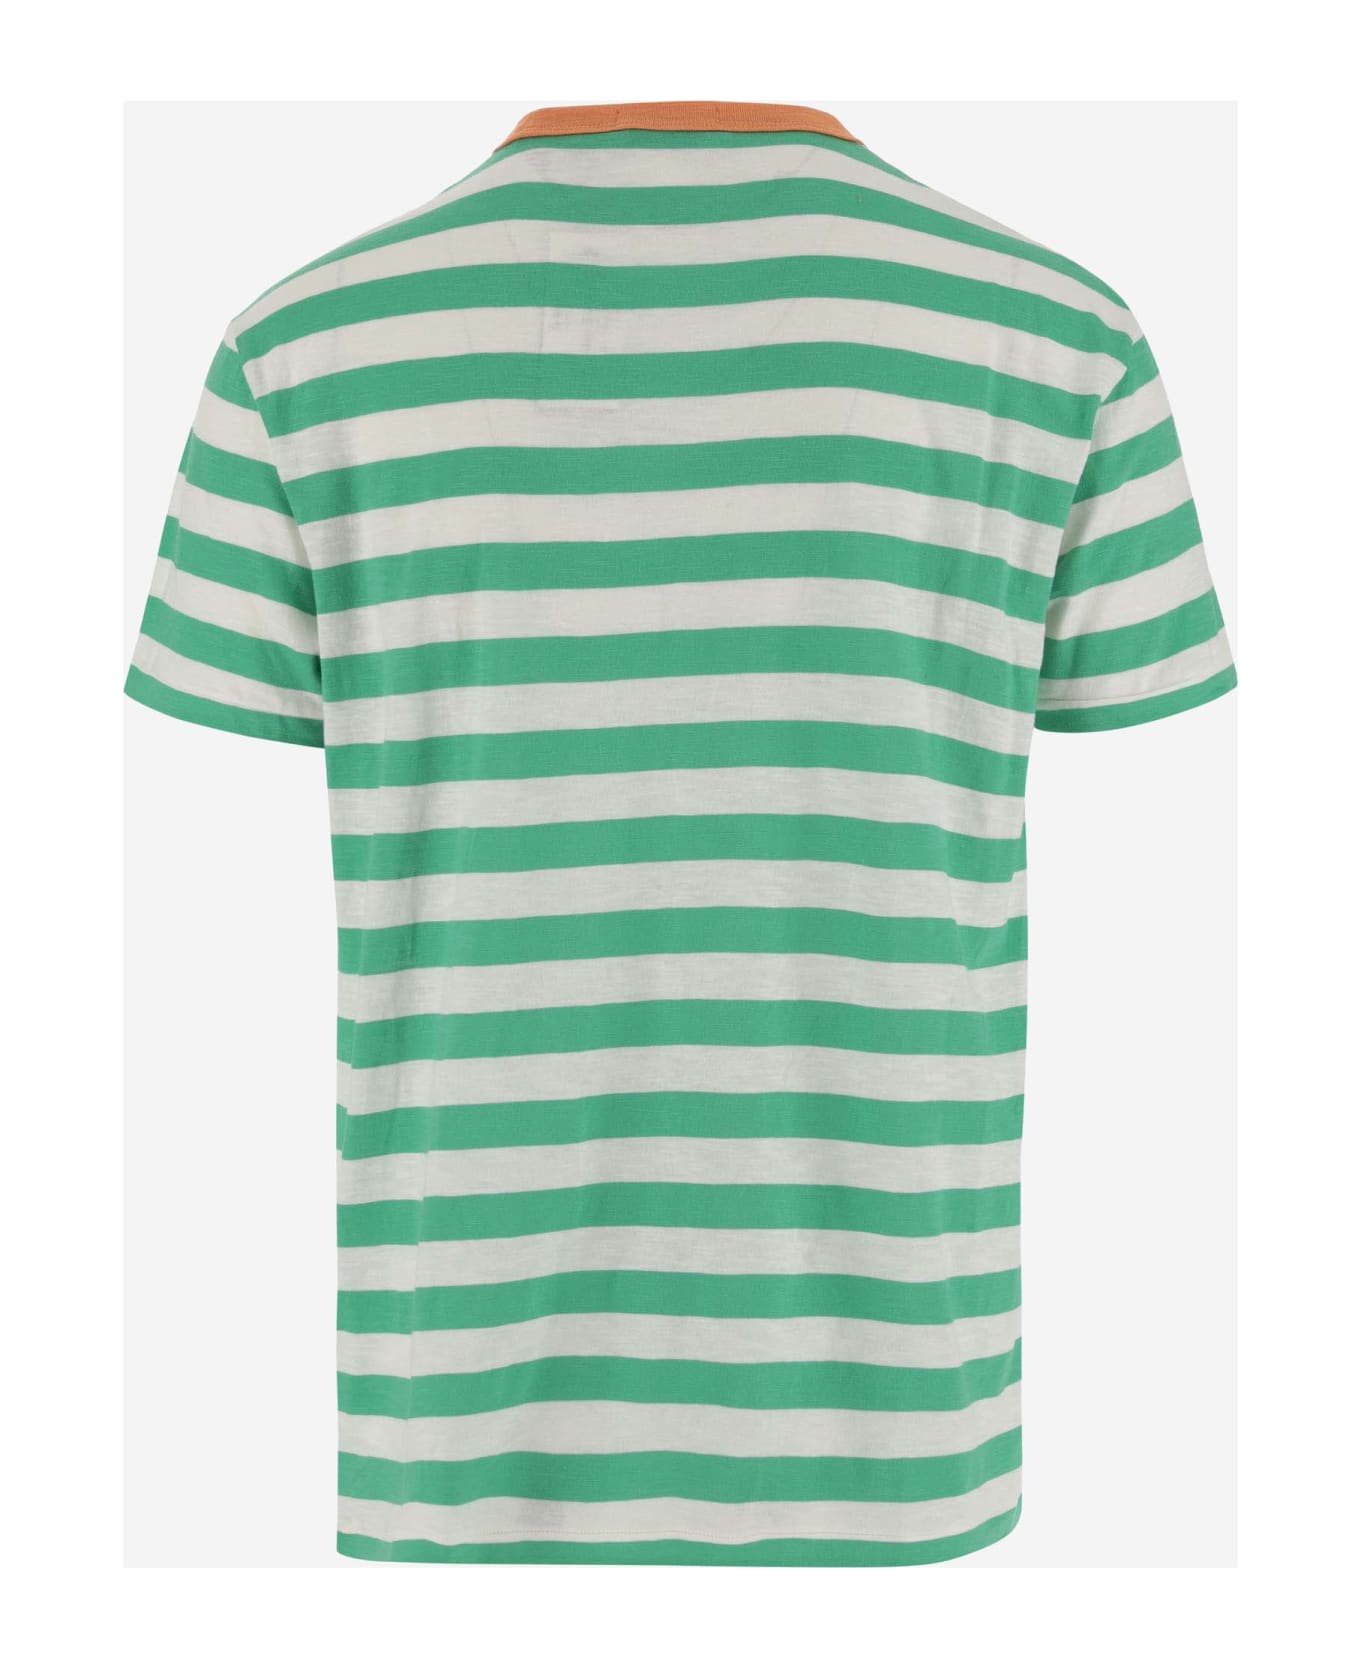 Polo Ralph Lauren Cotton T-shirt With Striped Pattern And Logo - Red